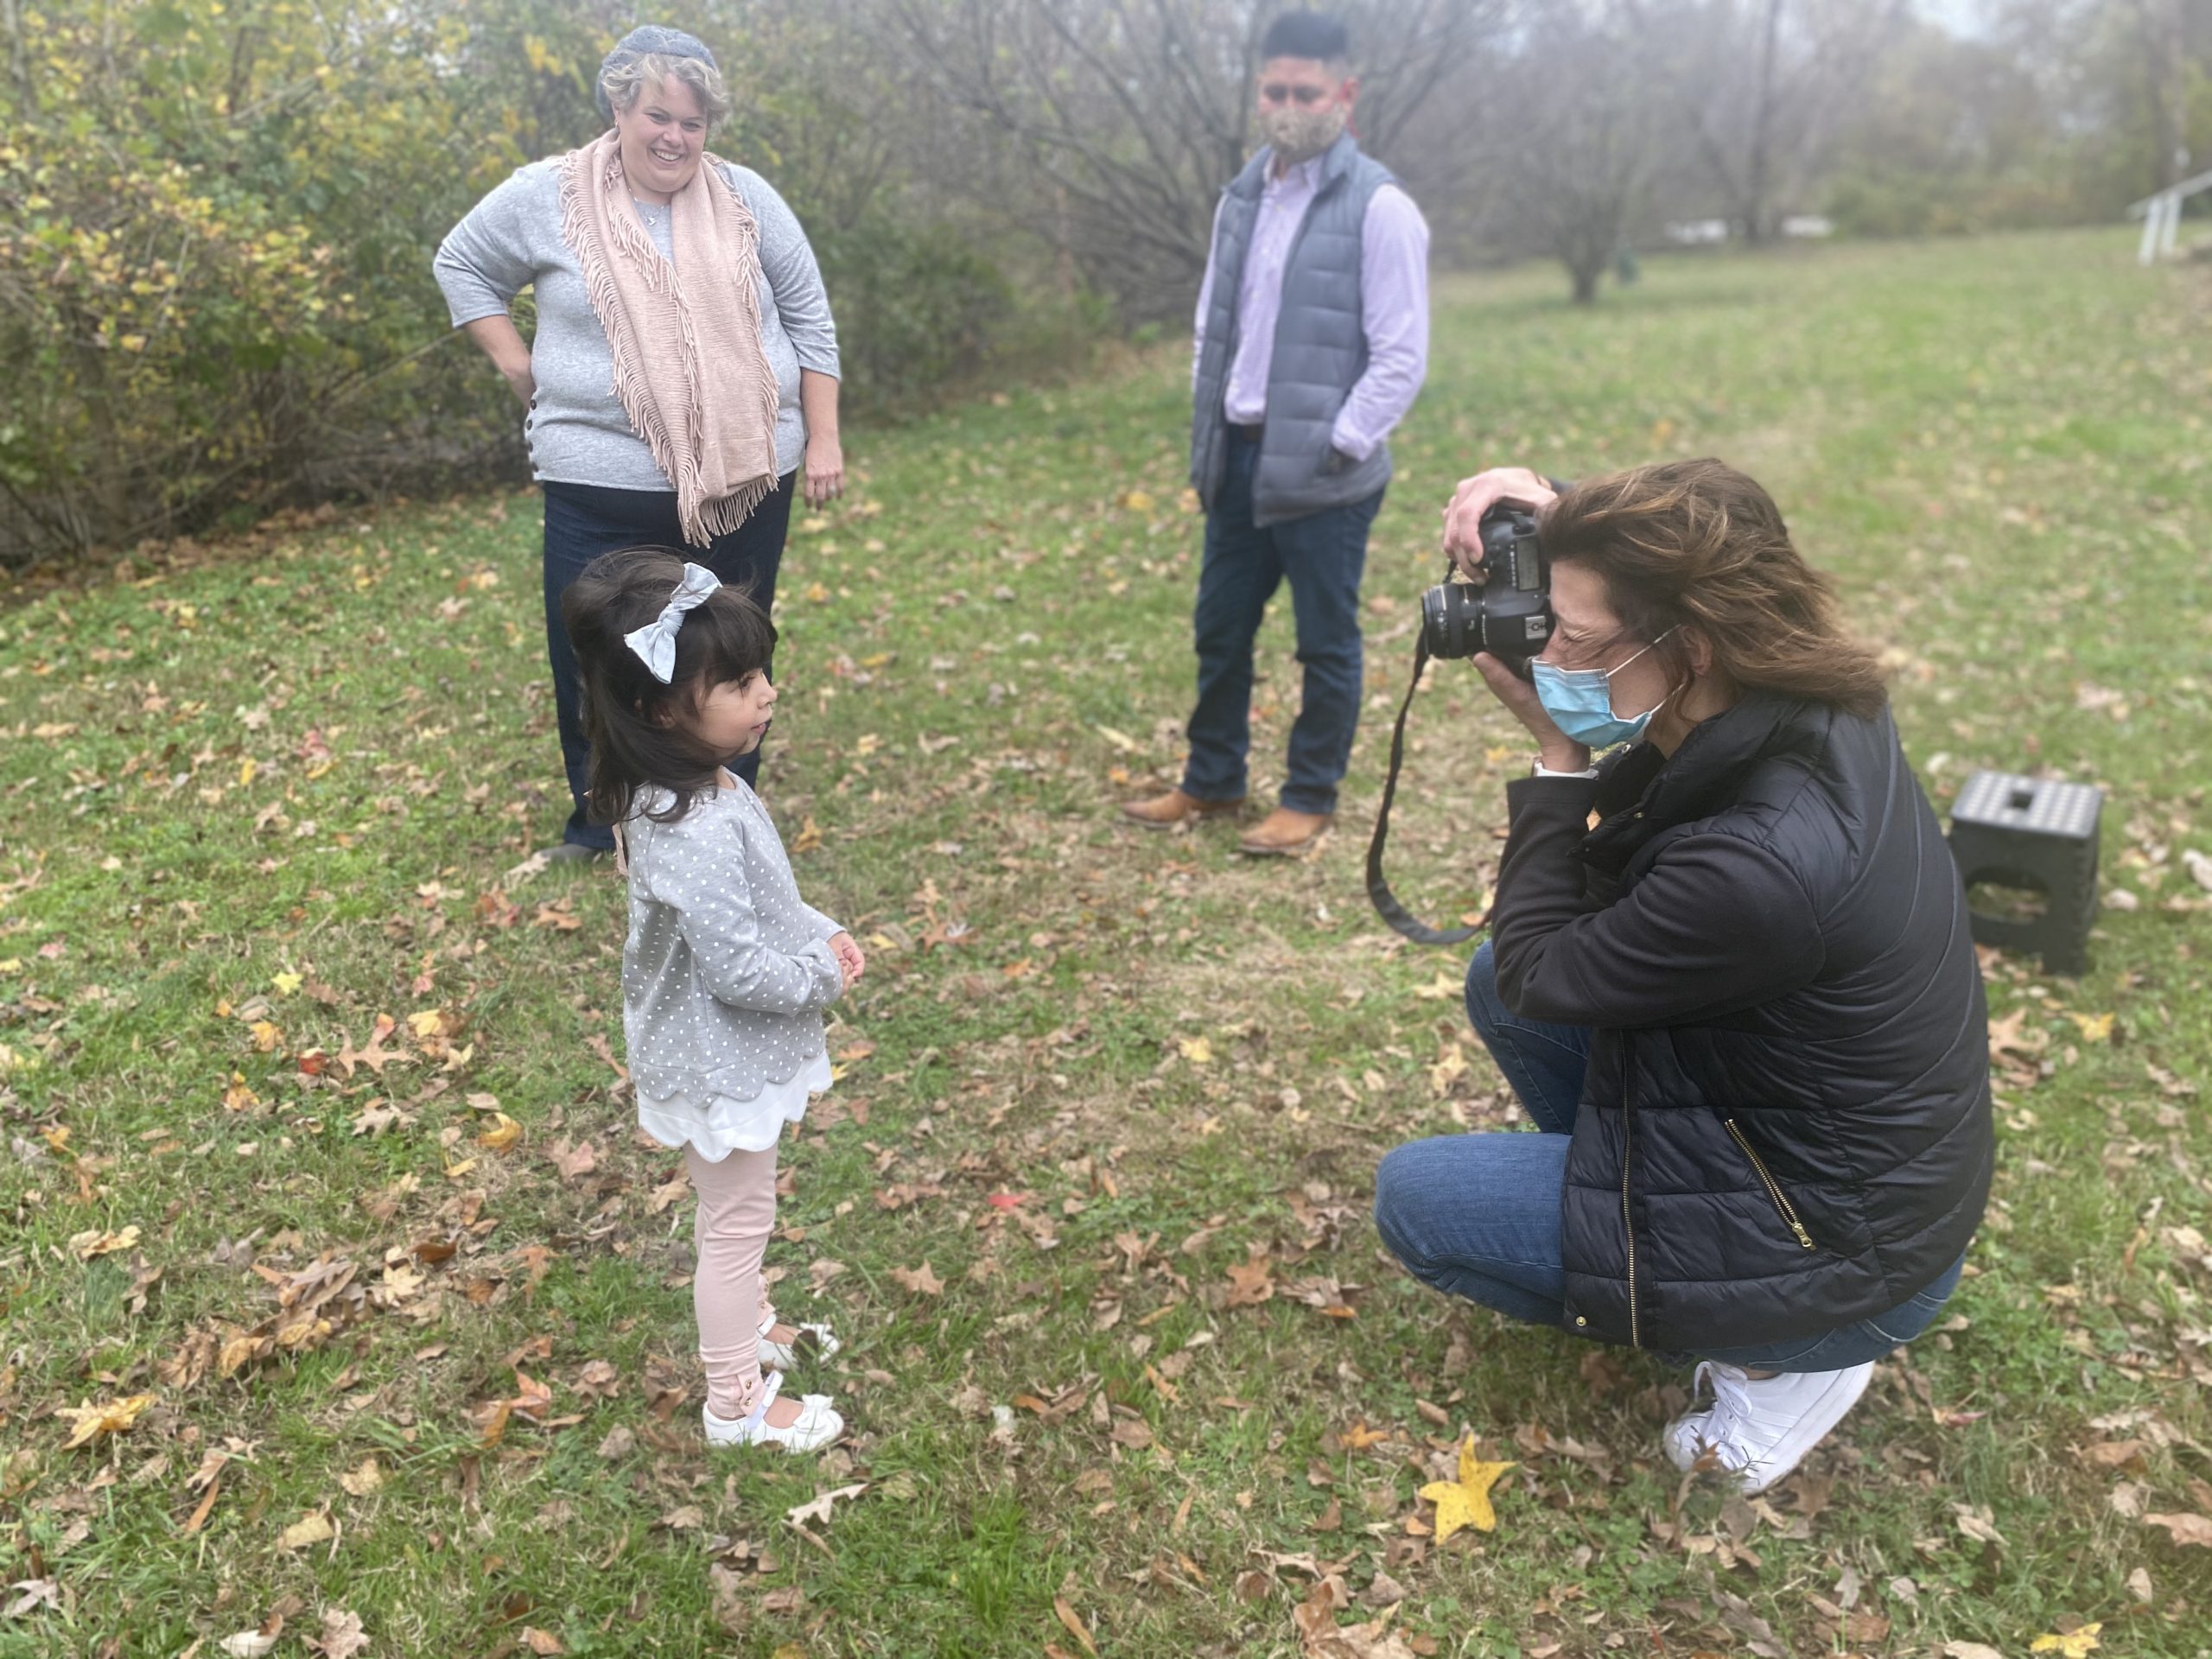 Photographer taking a photo of a family in a park